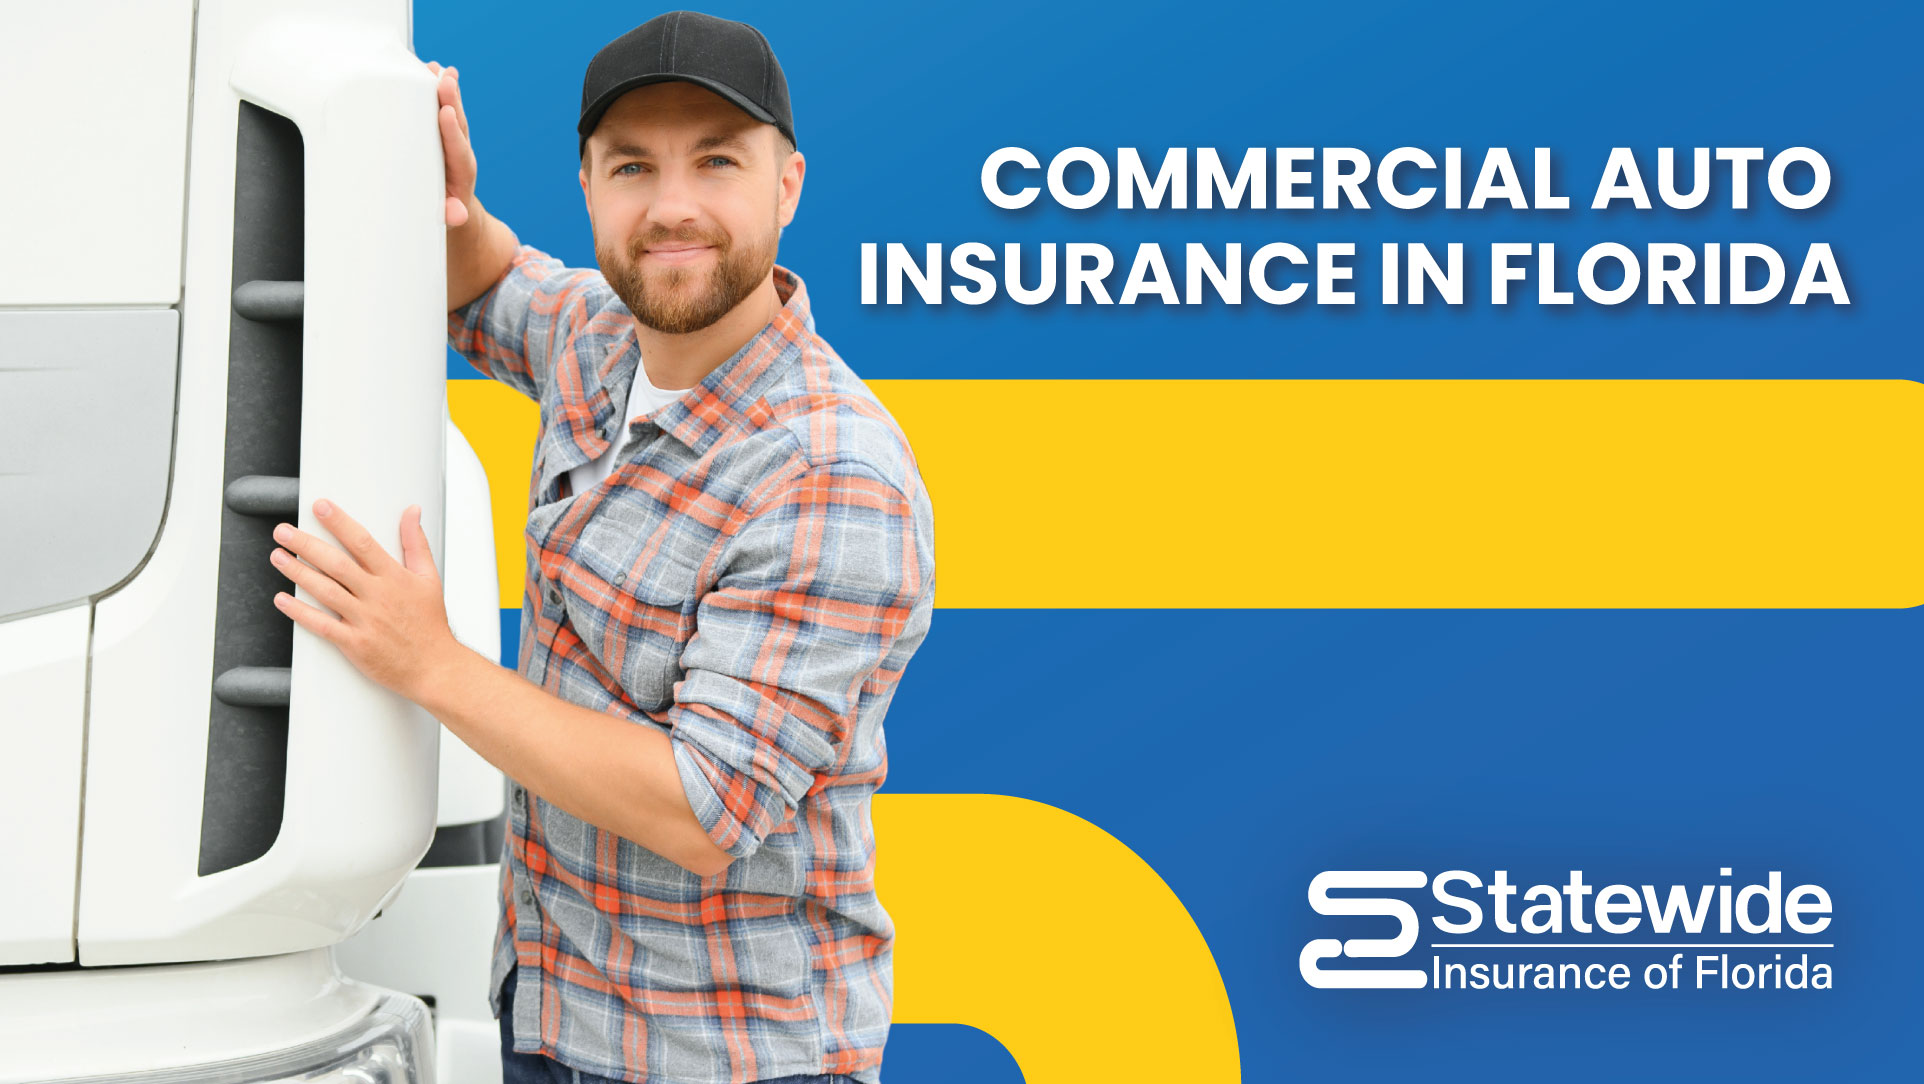 Commercial Auto Insurance Florida: Discover how commercial auto insurance operates in Florida, ensuring your business vehicles are protected on the road.